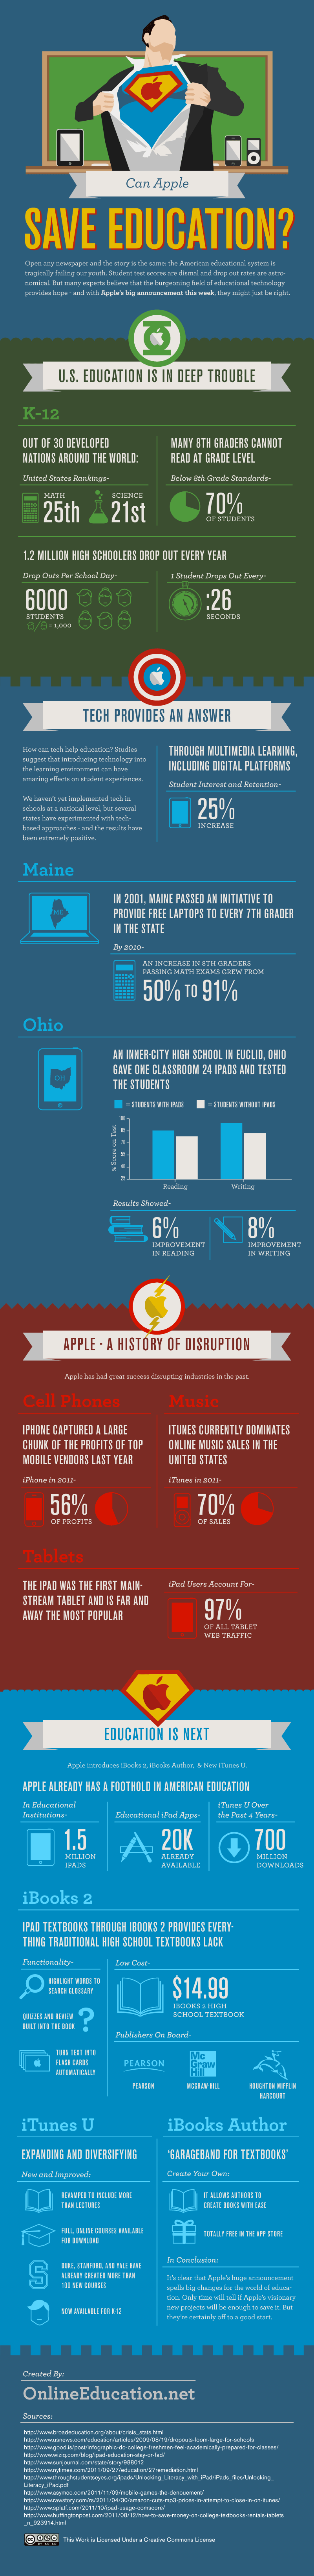 Can Apple Save Education? [InfoGraphic]